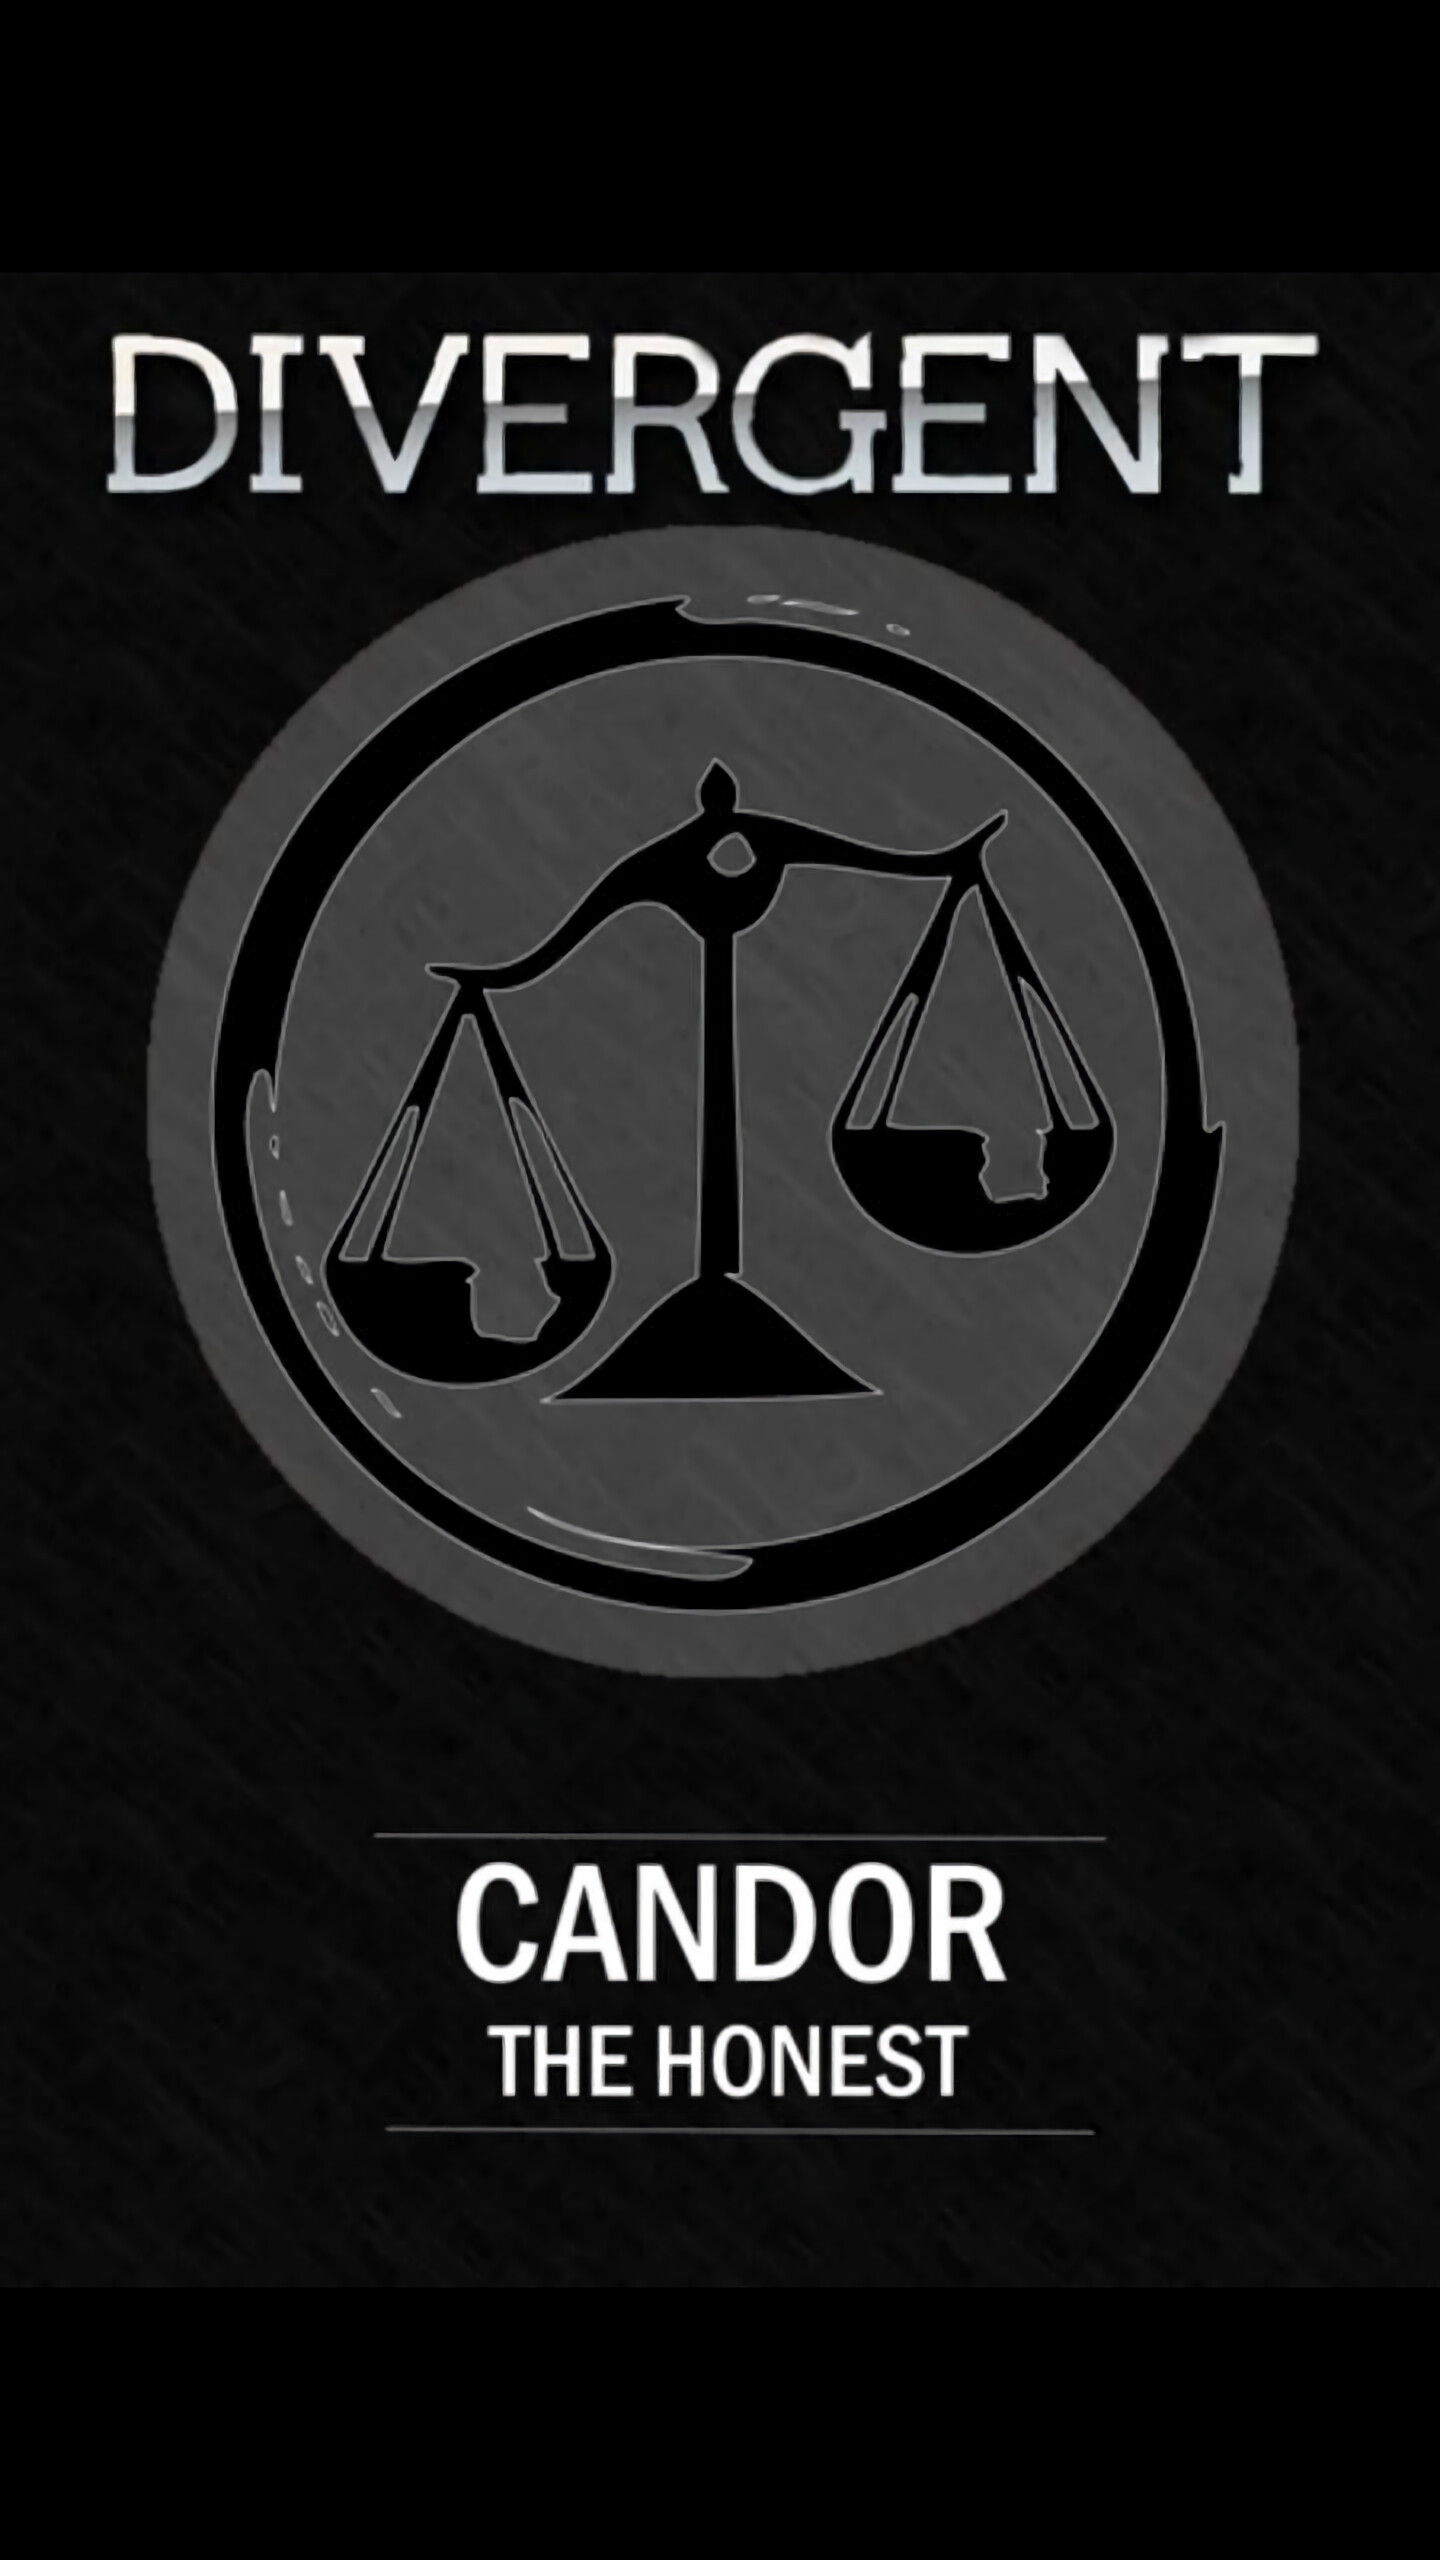 Divergent Candor movie, Dystopian society, Conformity vs. individuality, Challenging the system, 1440x2560 HD Handy